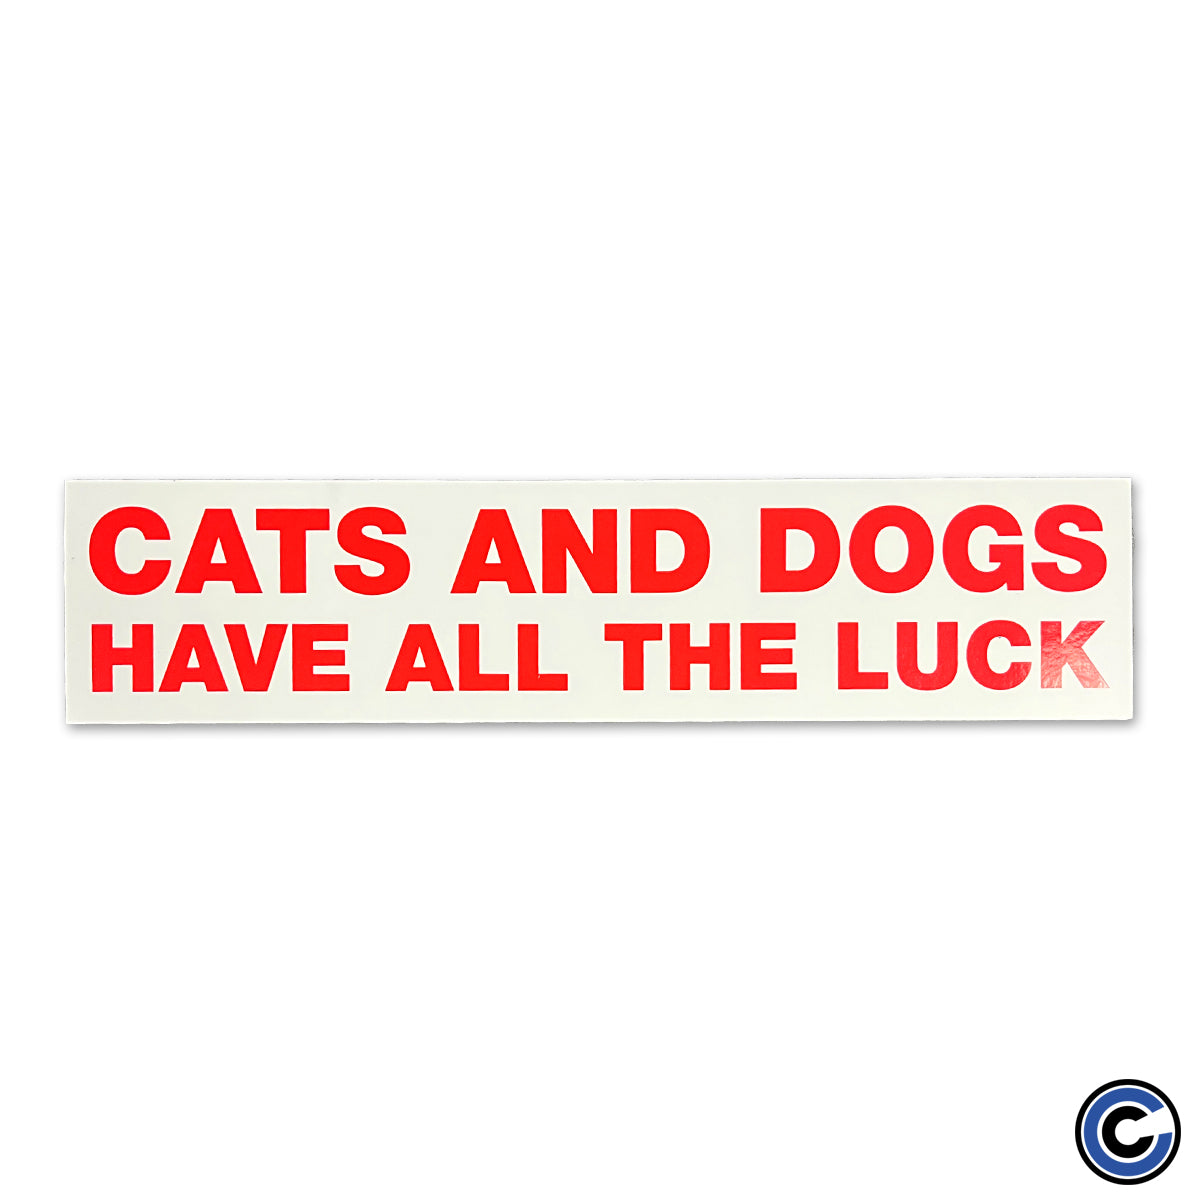 Gorilla Biscuits "Cats and Dogs" Sticker